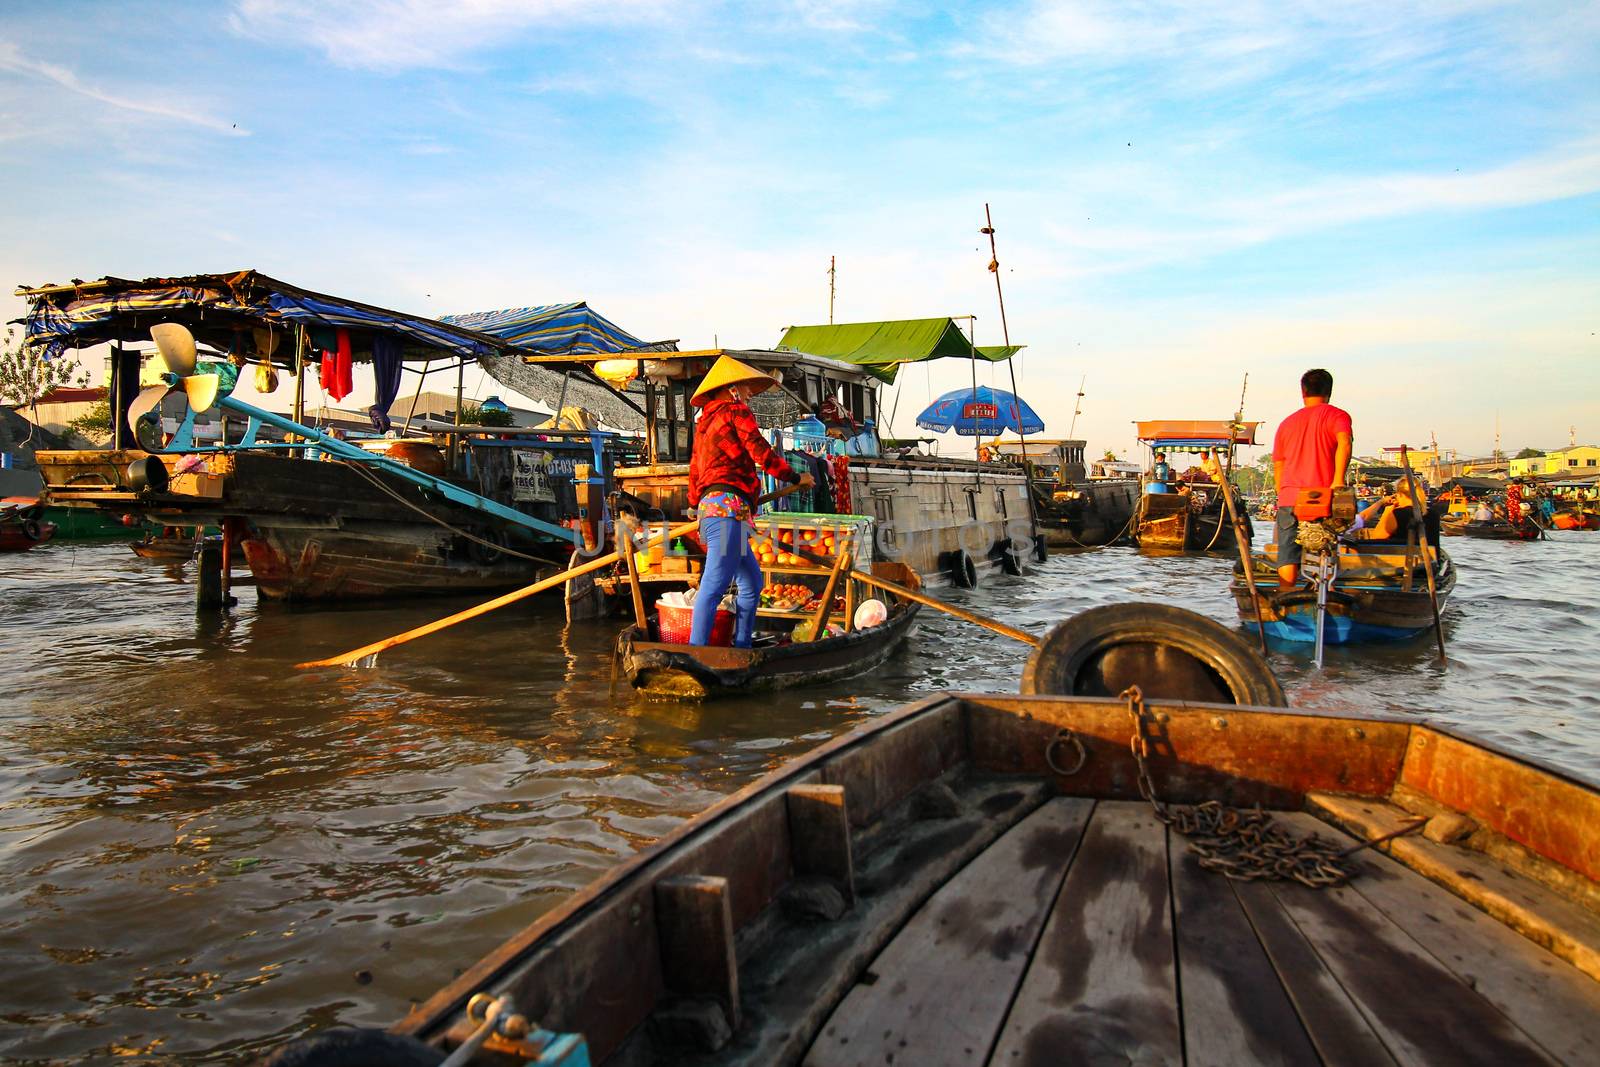 Famous Cai rang Floating Market in Vietnam by Sonnet15